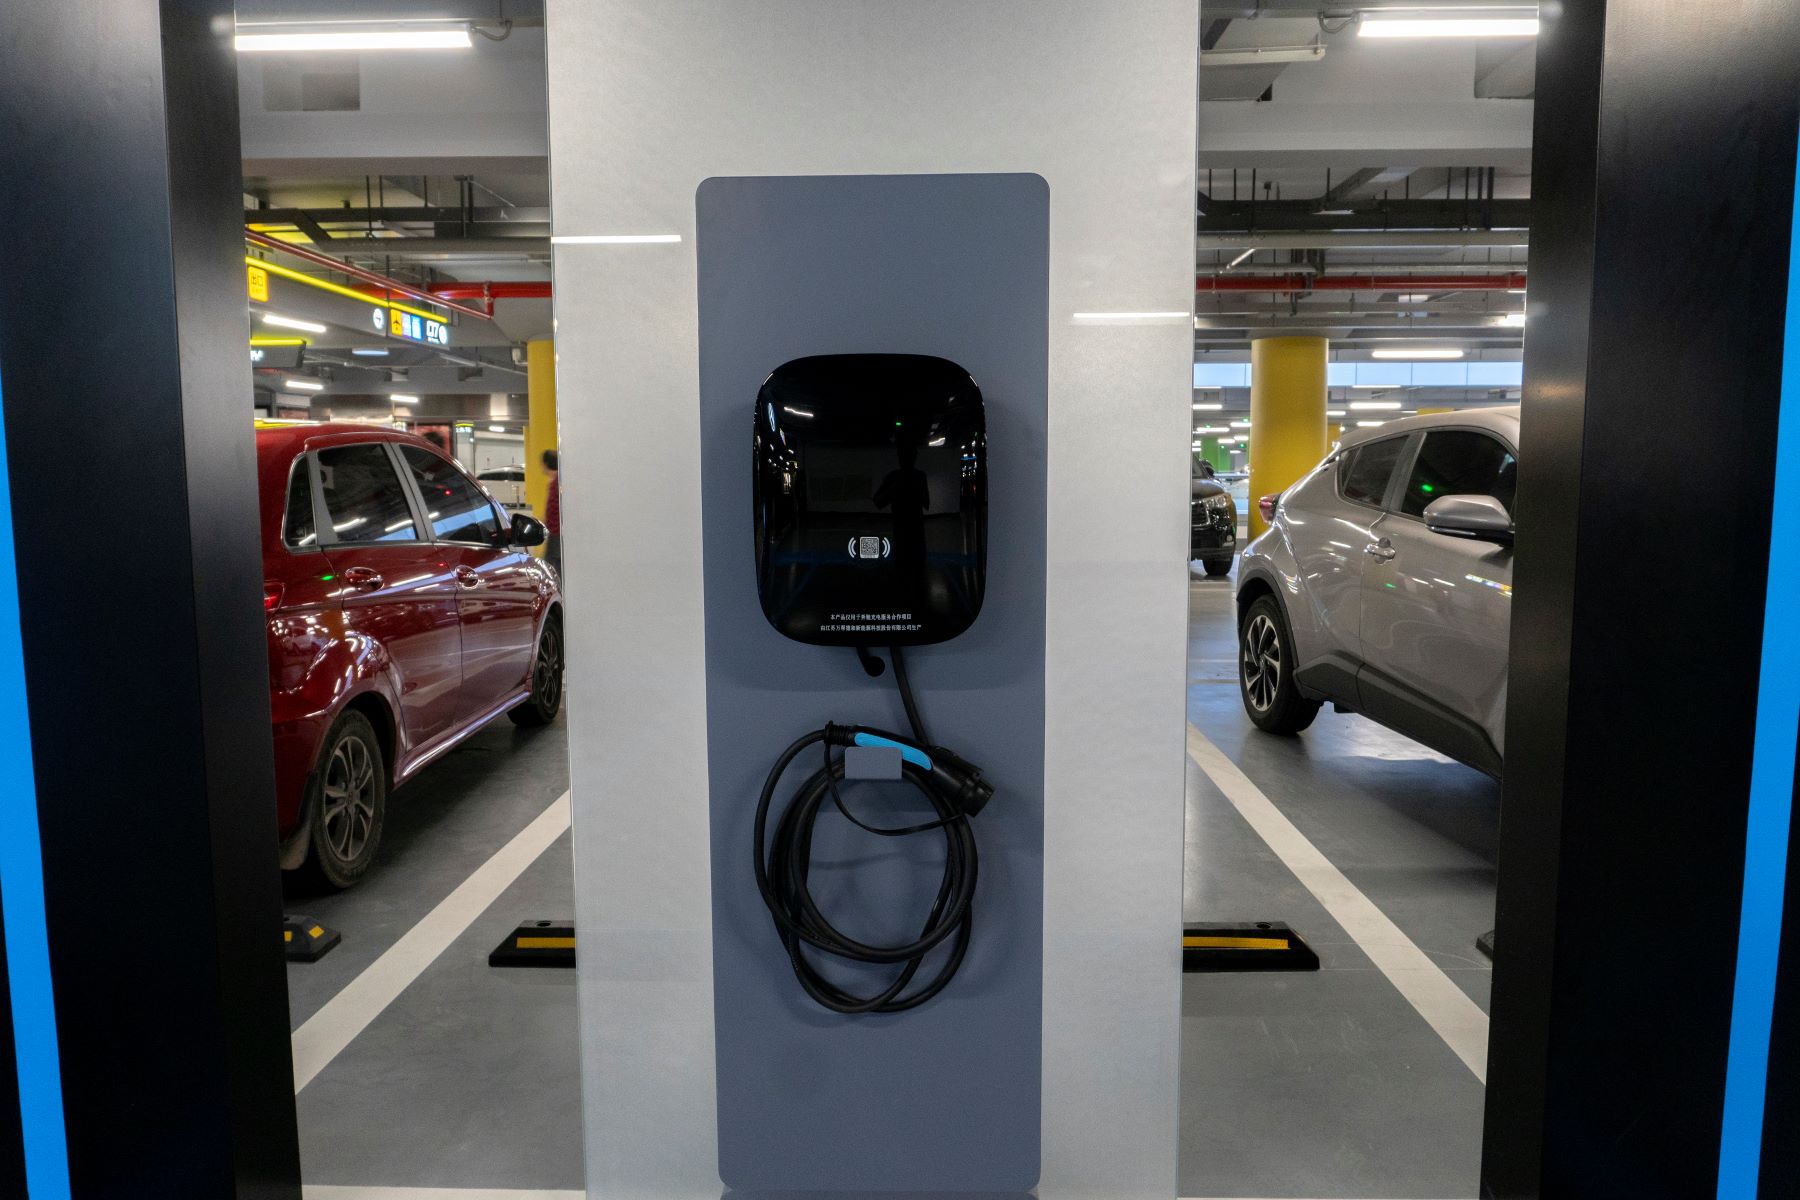 A Mercedes-Benz electric vehicle (EV) charging station at the Beijing Daxing international airport in China